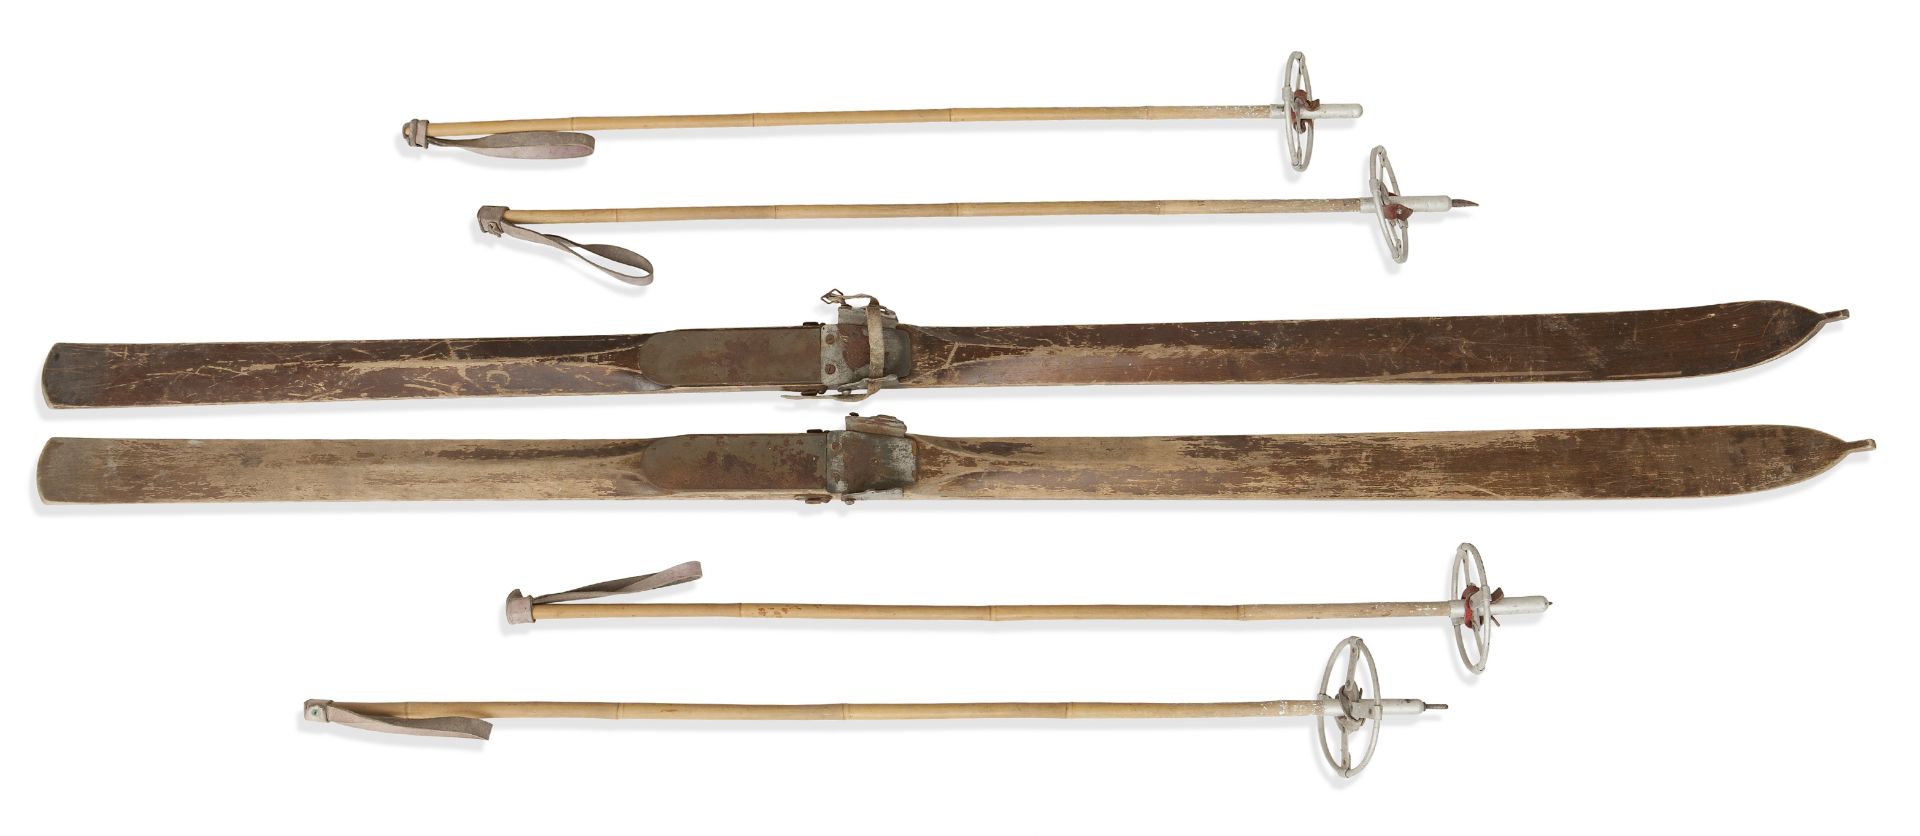 A collection of early 20th century ski equipment (5)